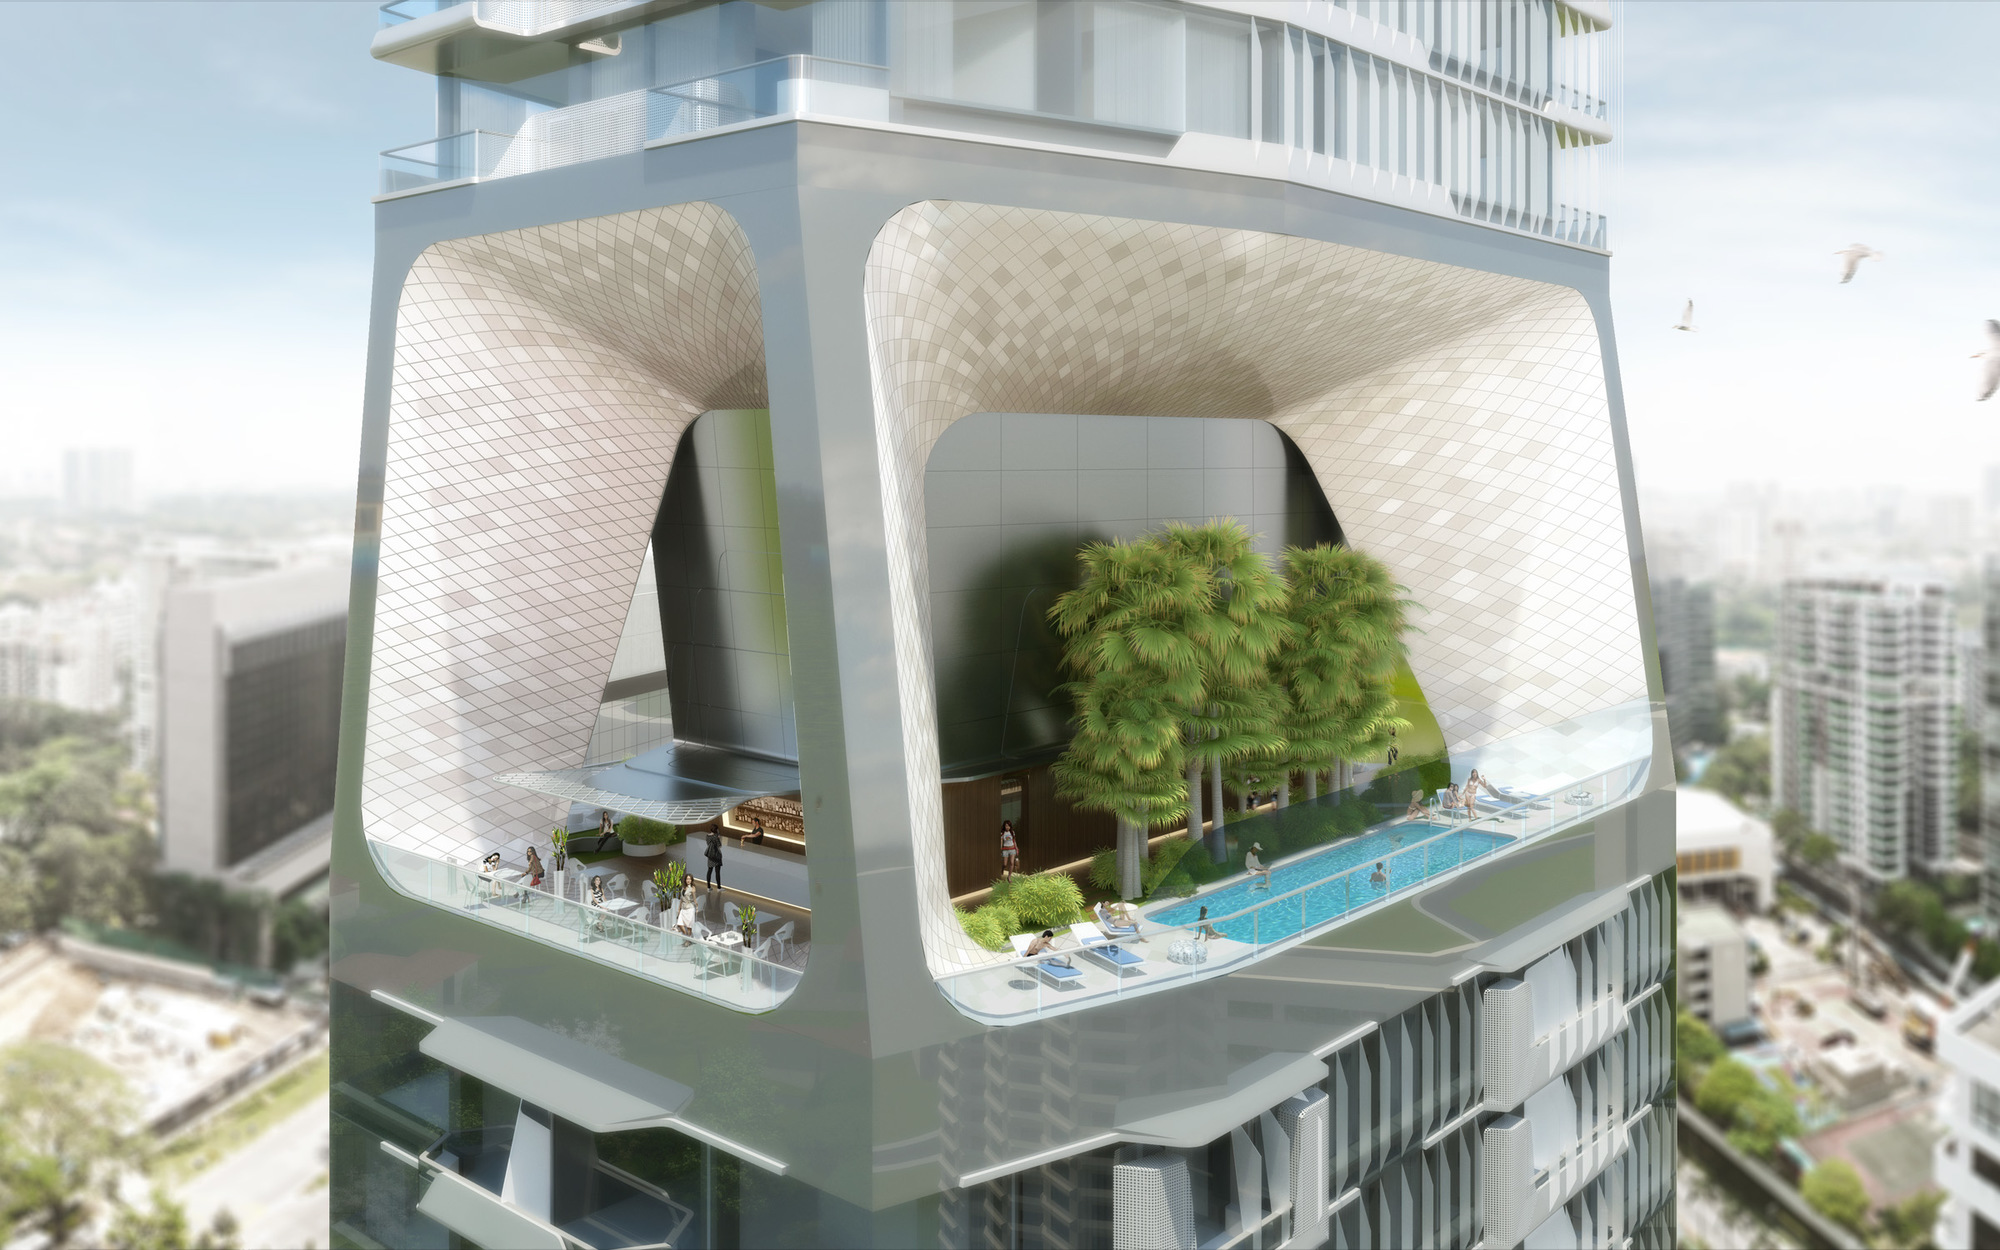 UNStudio's design for The Scotts Tower in Singapore unveiled